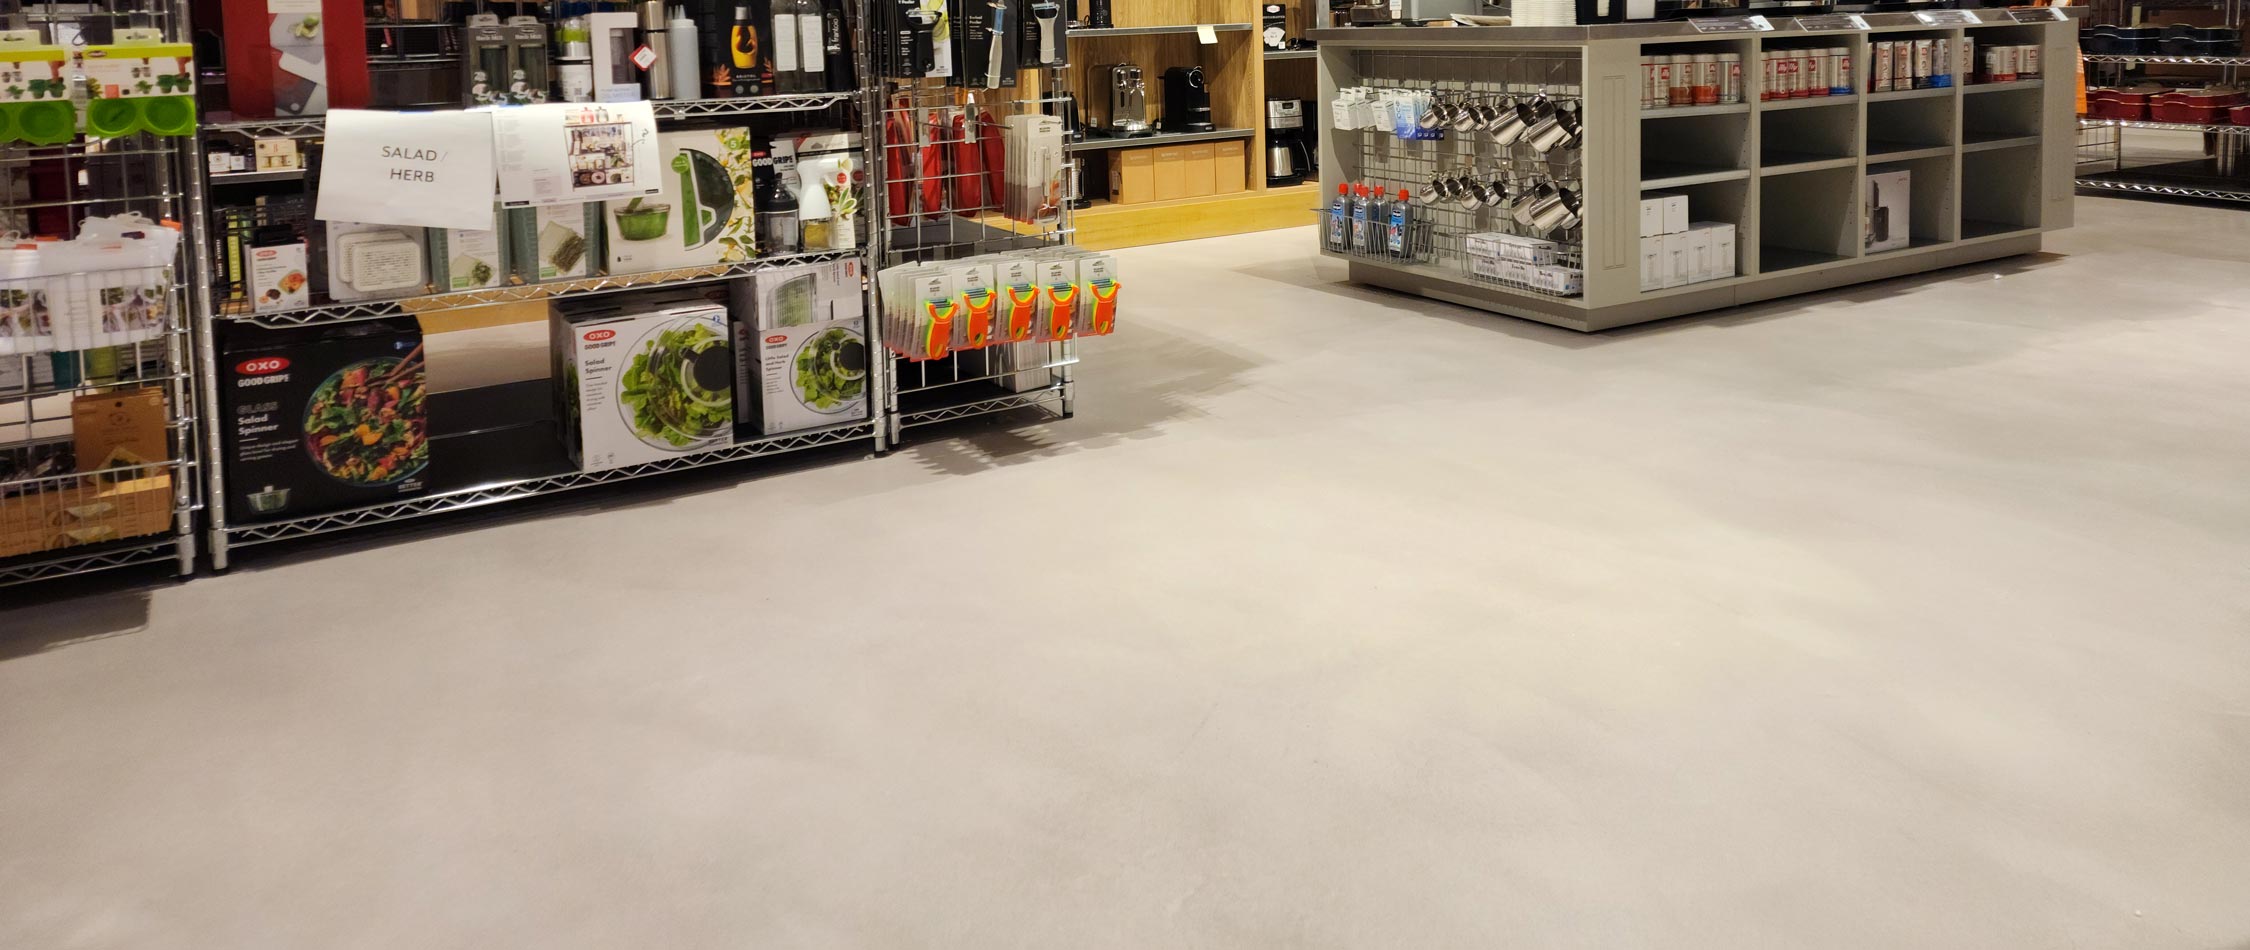 Polished Concrete Floor in retail location Polished Concrete Floors Over Radiant Heat | Duraamen Engineered Products Inc